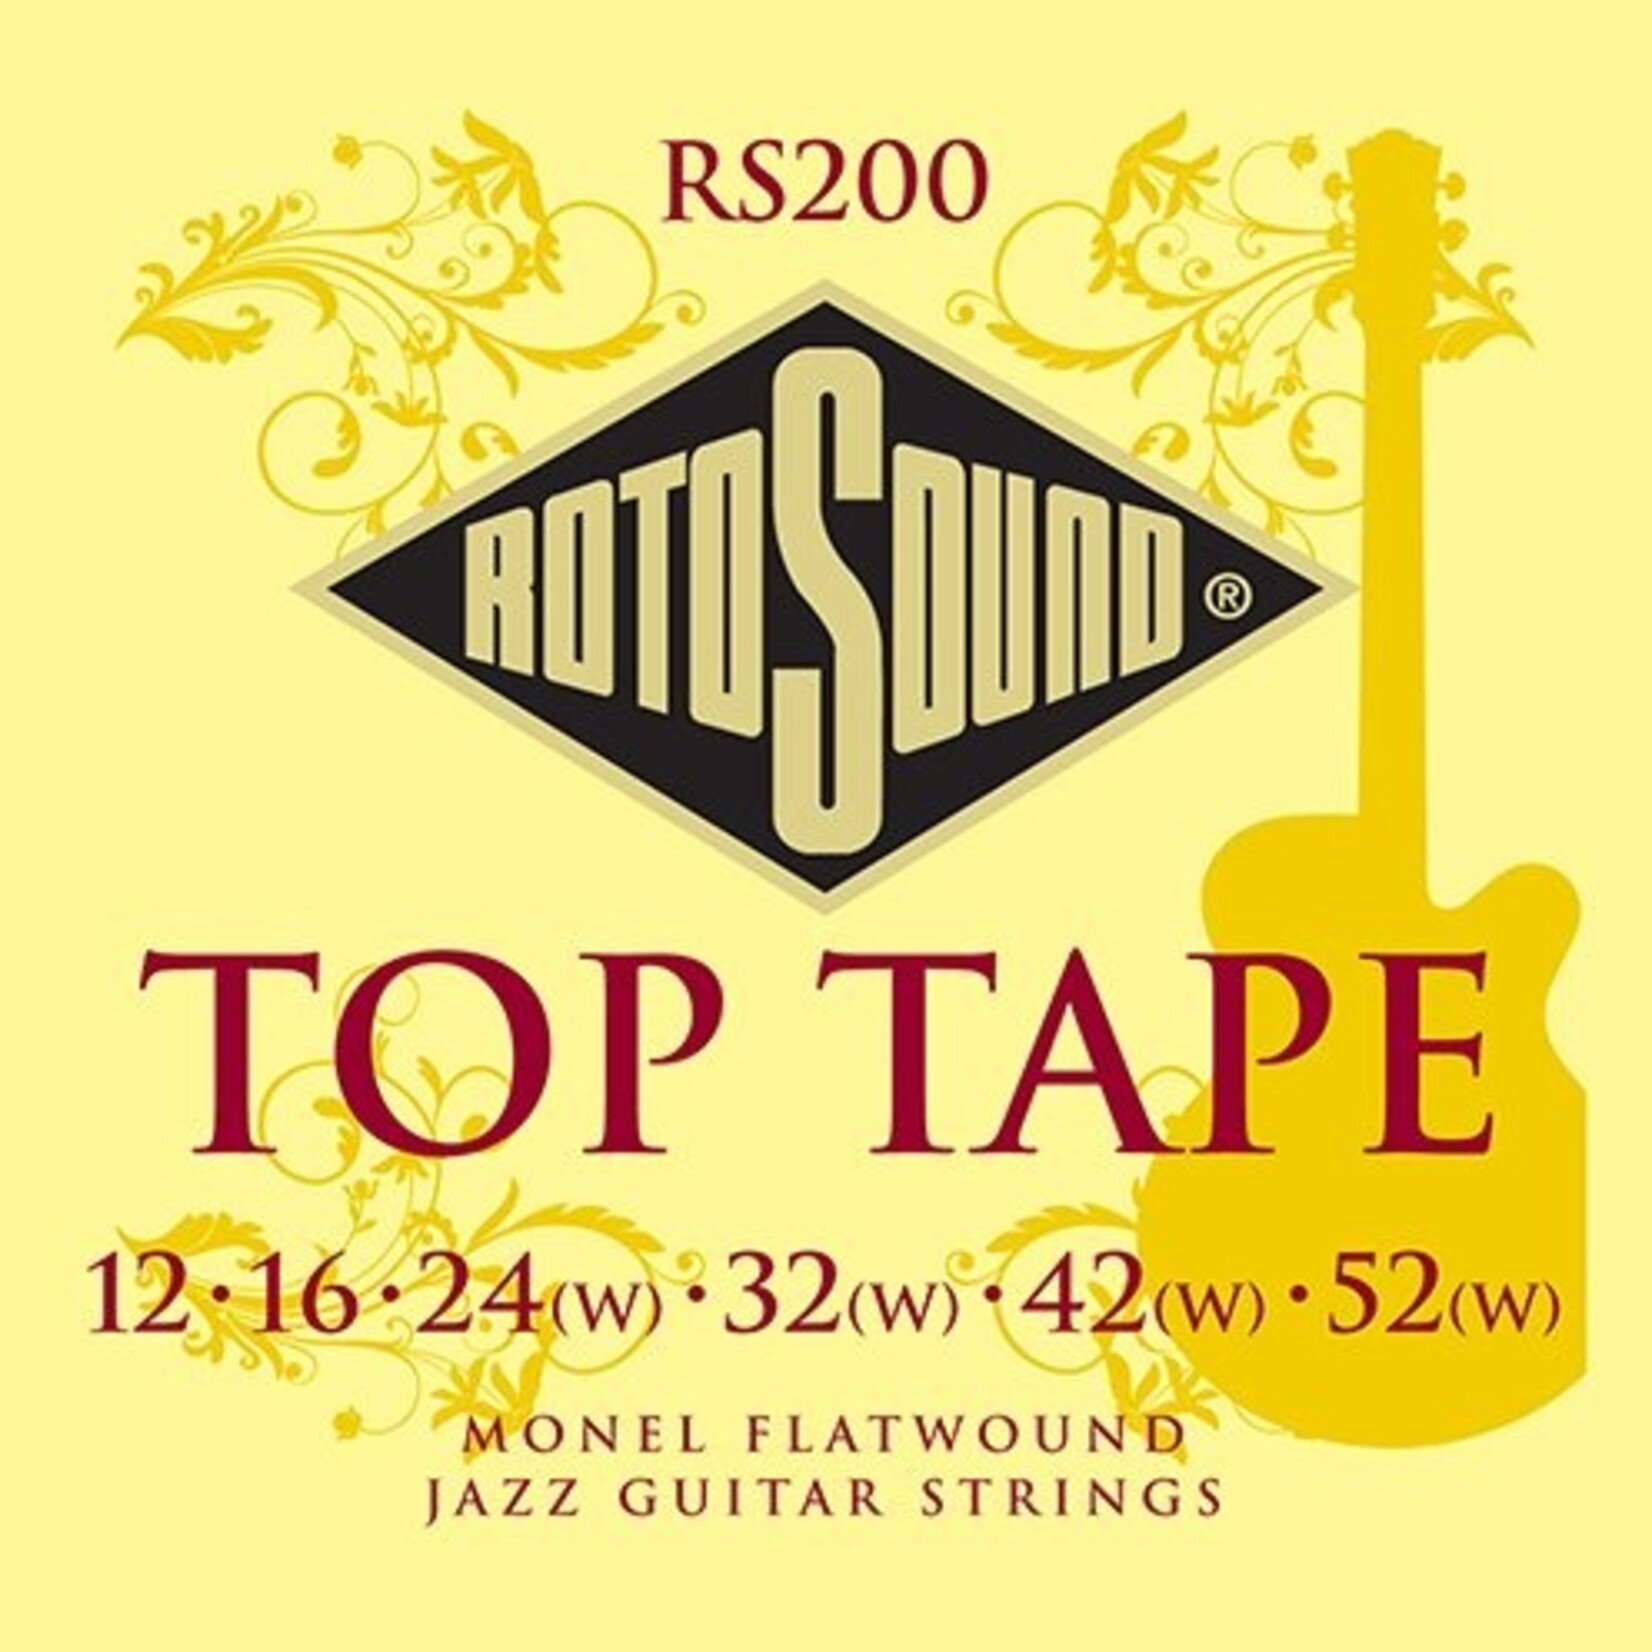 Rotosound RS200 Top Tape Monel Flatwound Electric Guitar String (12 16 24 32 42 52)